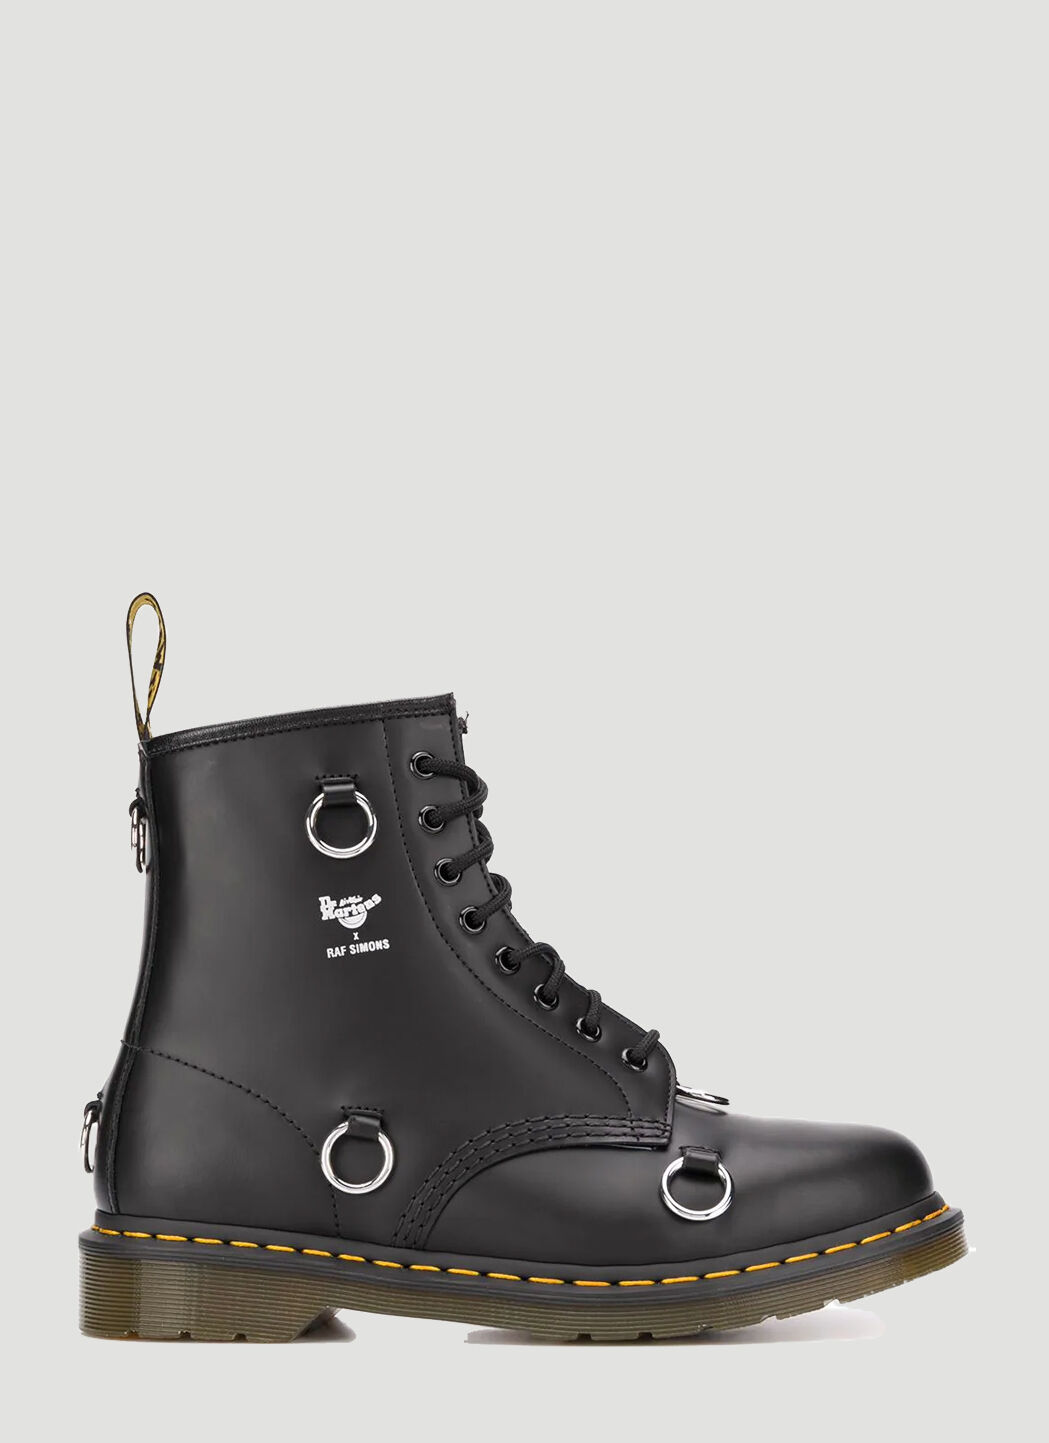 Raf Simons x Fred Perry X Dr. Martens Edition Ring-Embellished Boots Black rsf0152002